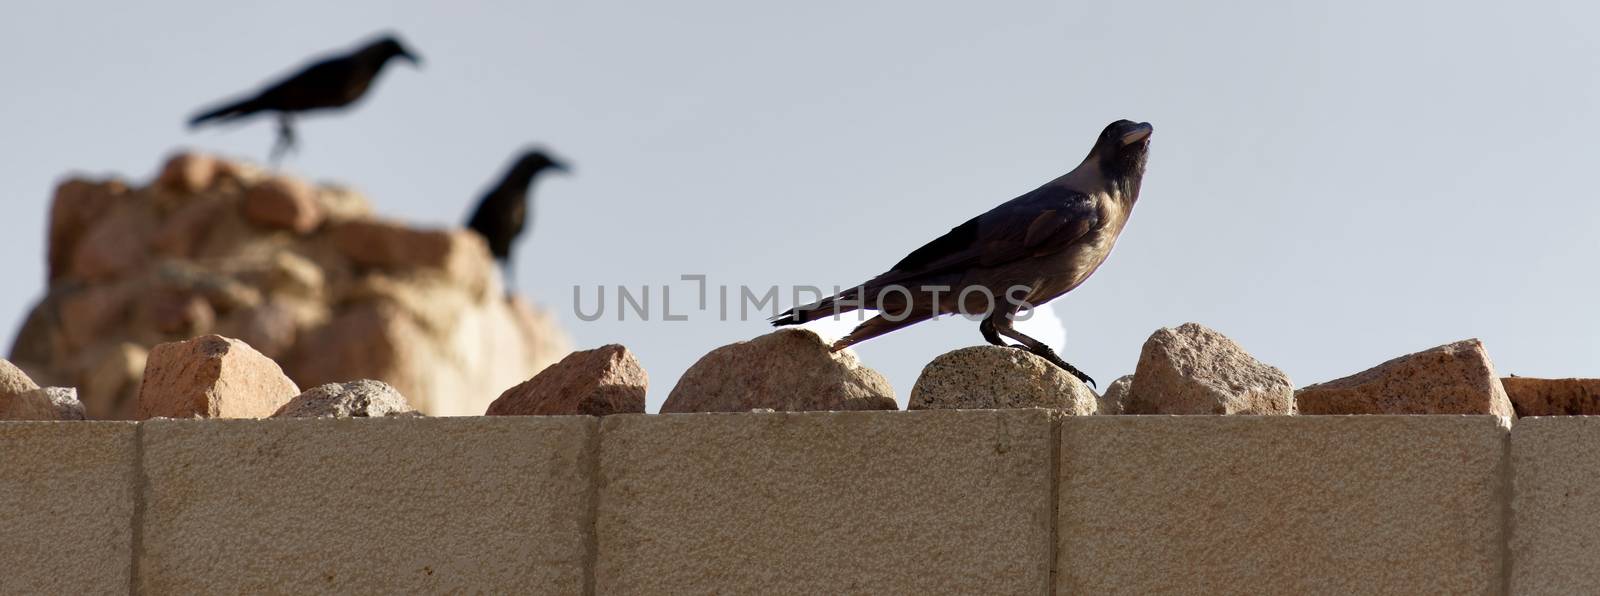 Black ravens and crows on the wall of the fortress of Aqaba, Jordan, middle east